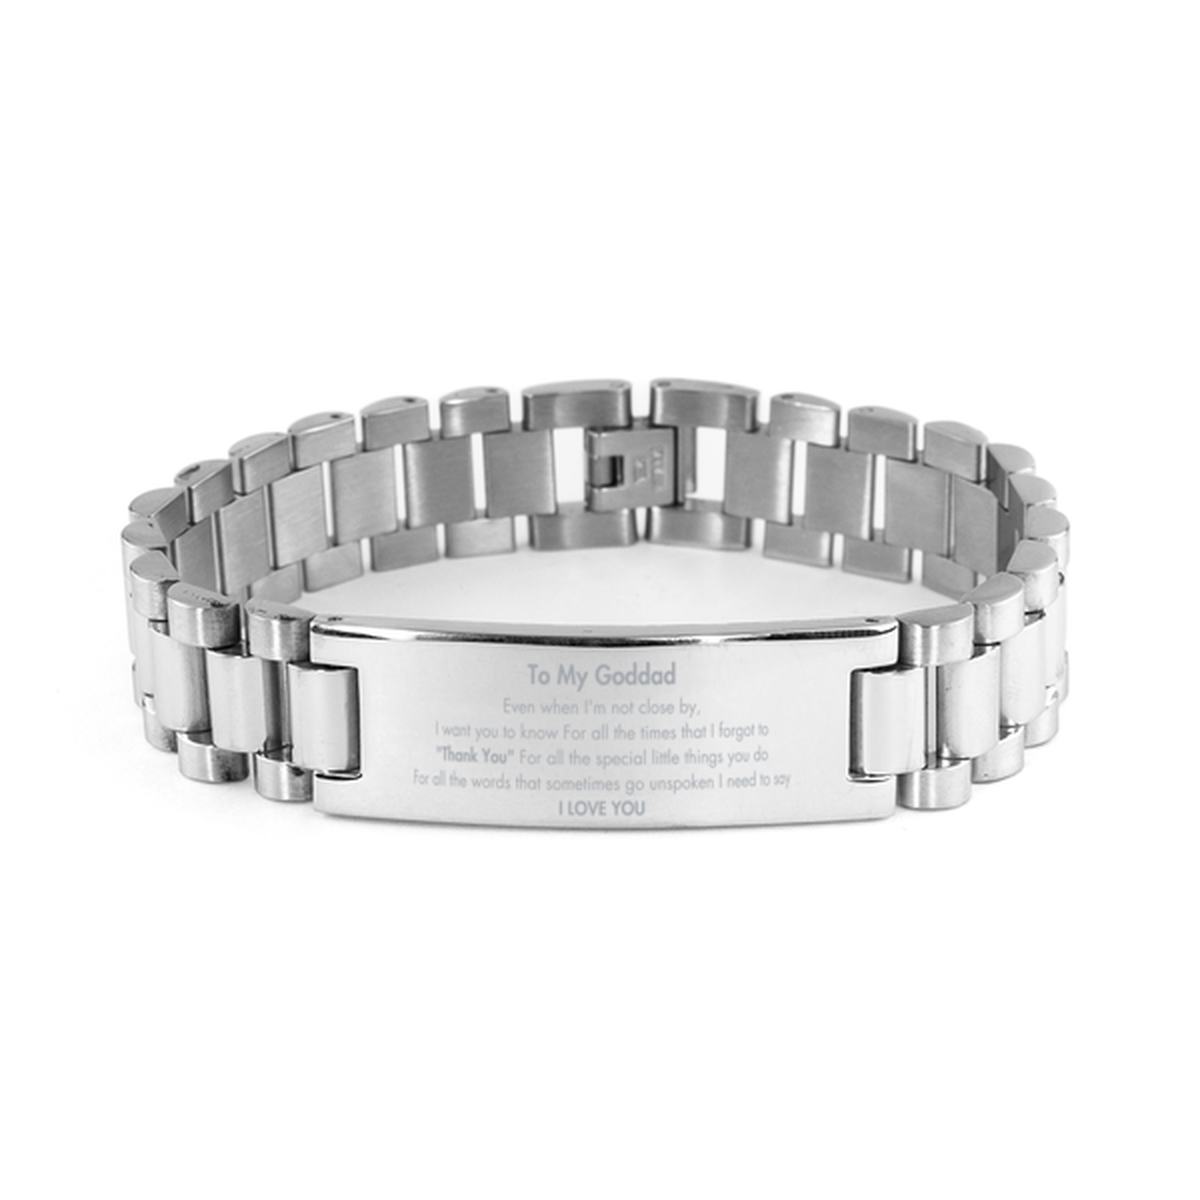 Thank You Gifts for Goddad, Keepsake Ladder Stainless Steel Bracelet Gifts for Goddad Birthday Mother's day Father's Day Goddad For all the words That sometimes go unspoken I need to say I LOVE YOU